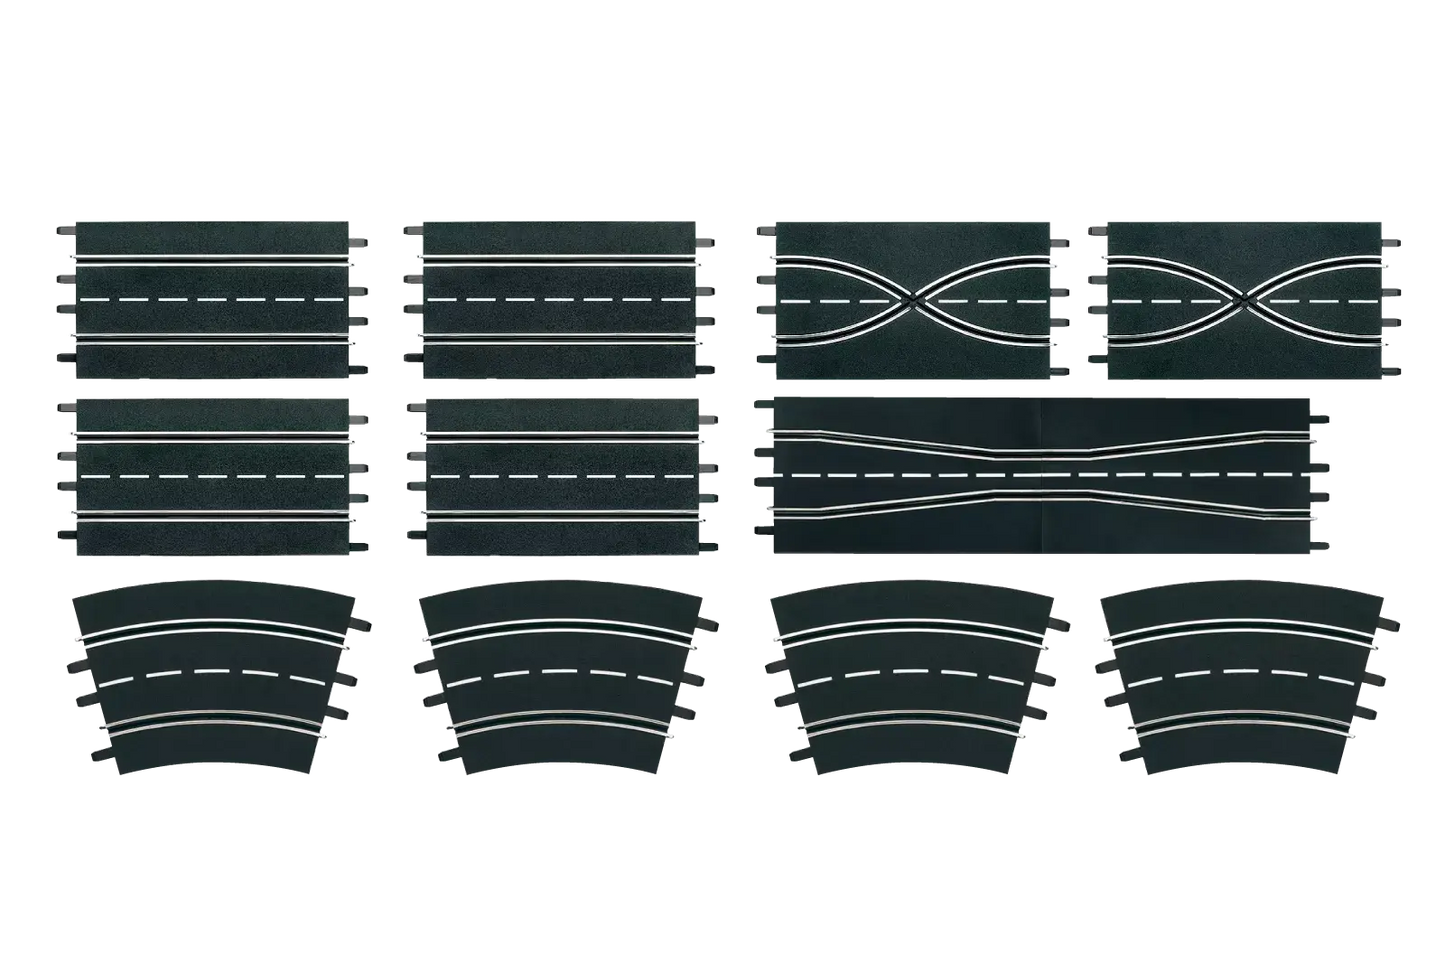 Extension set (4 straights, 2 lane change sections
(1:24 Scale)